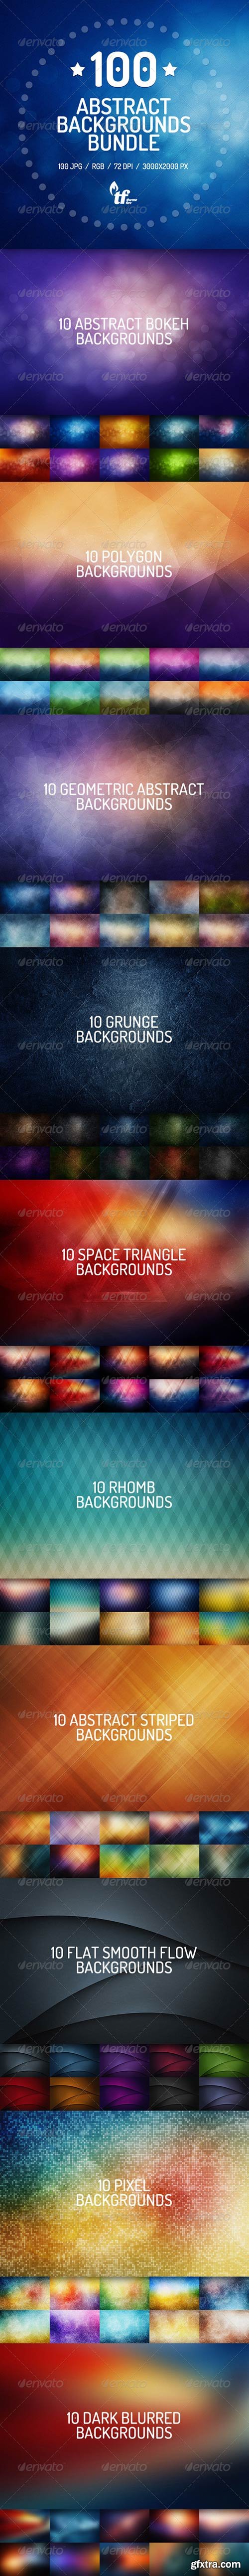 GraphicRiver - 100 Abstract Backgrounds Bundle 7821118